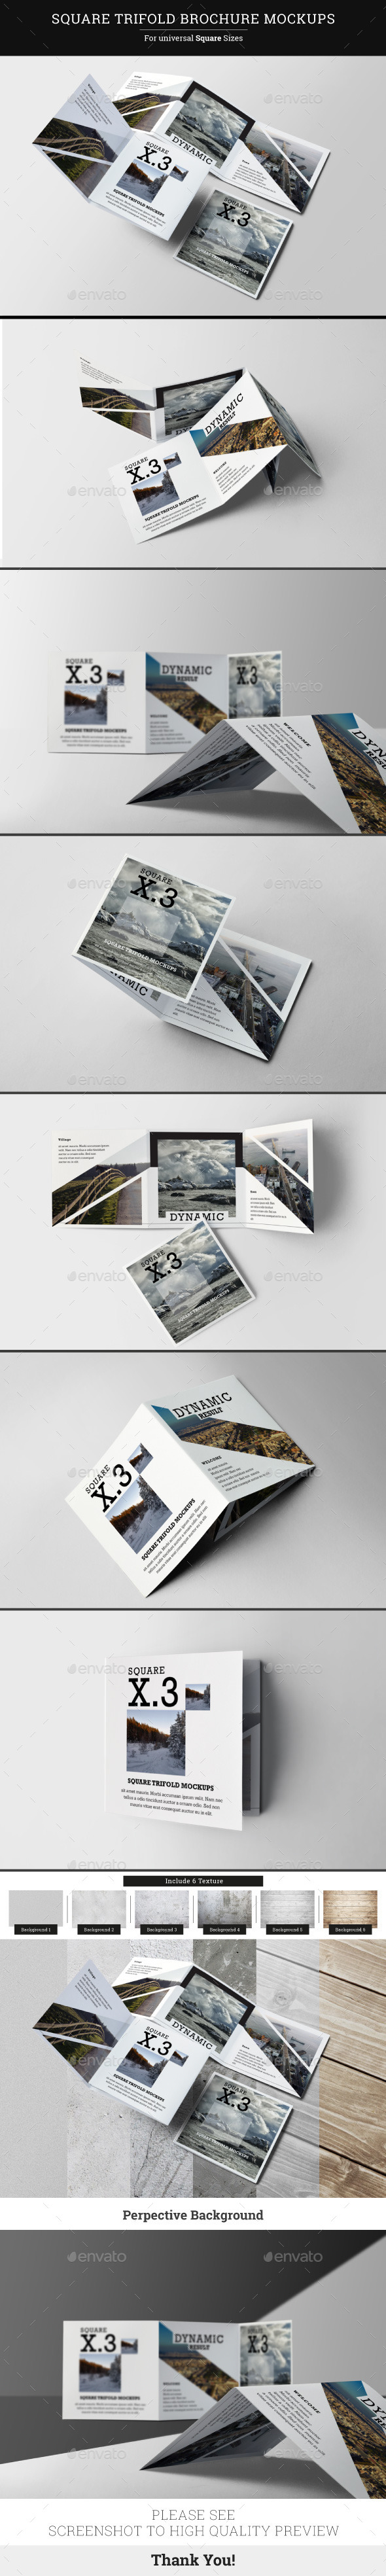 Download Square Trifold Brochure Mockups by kongkow | GraphicRiver